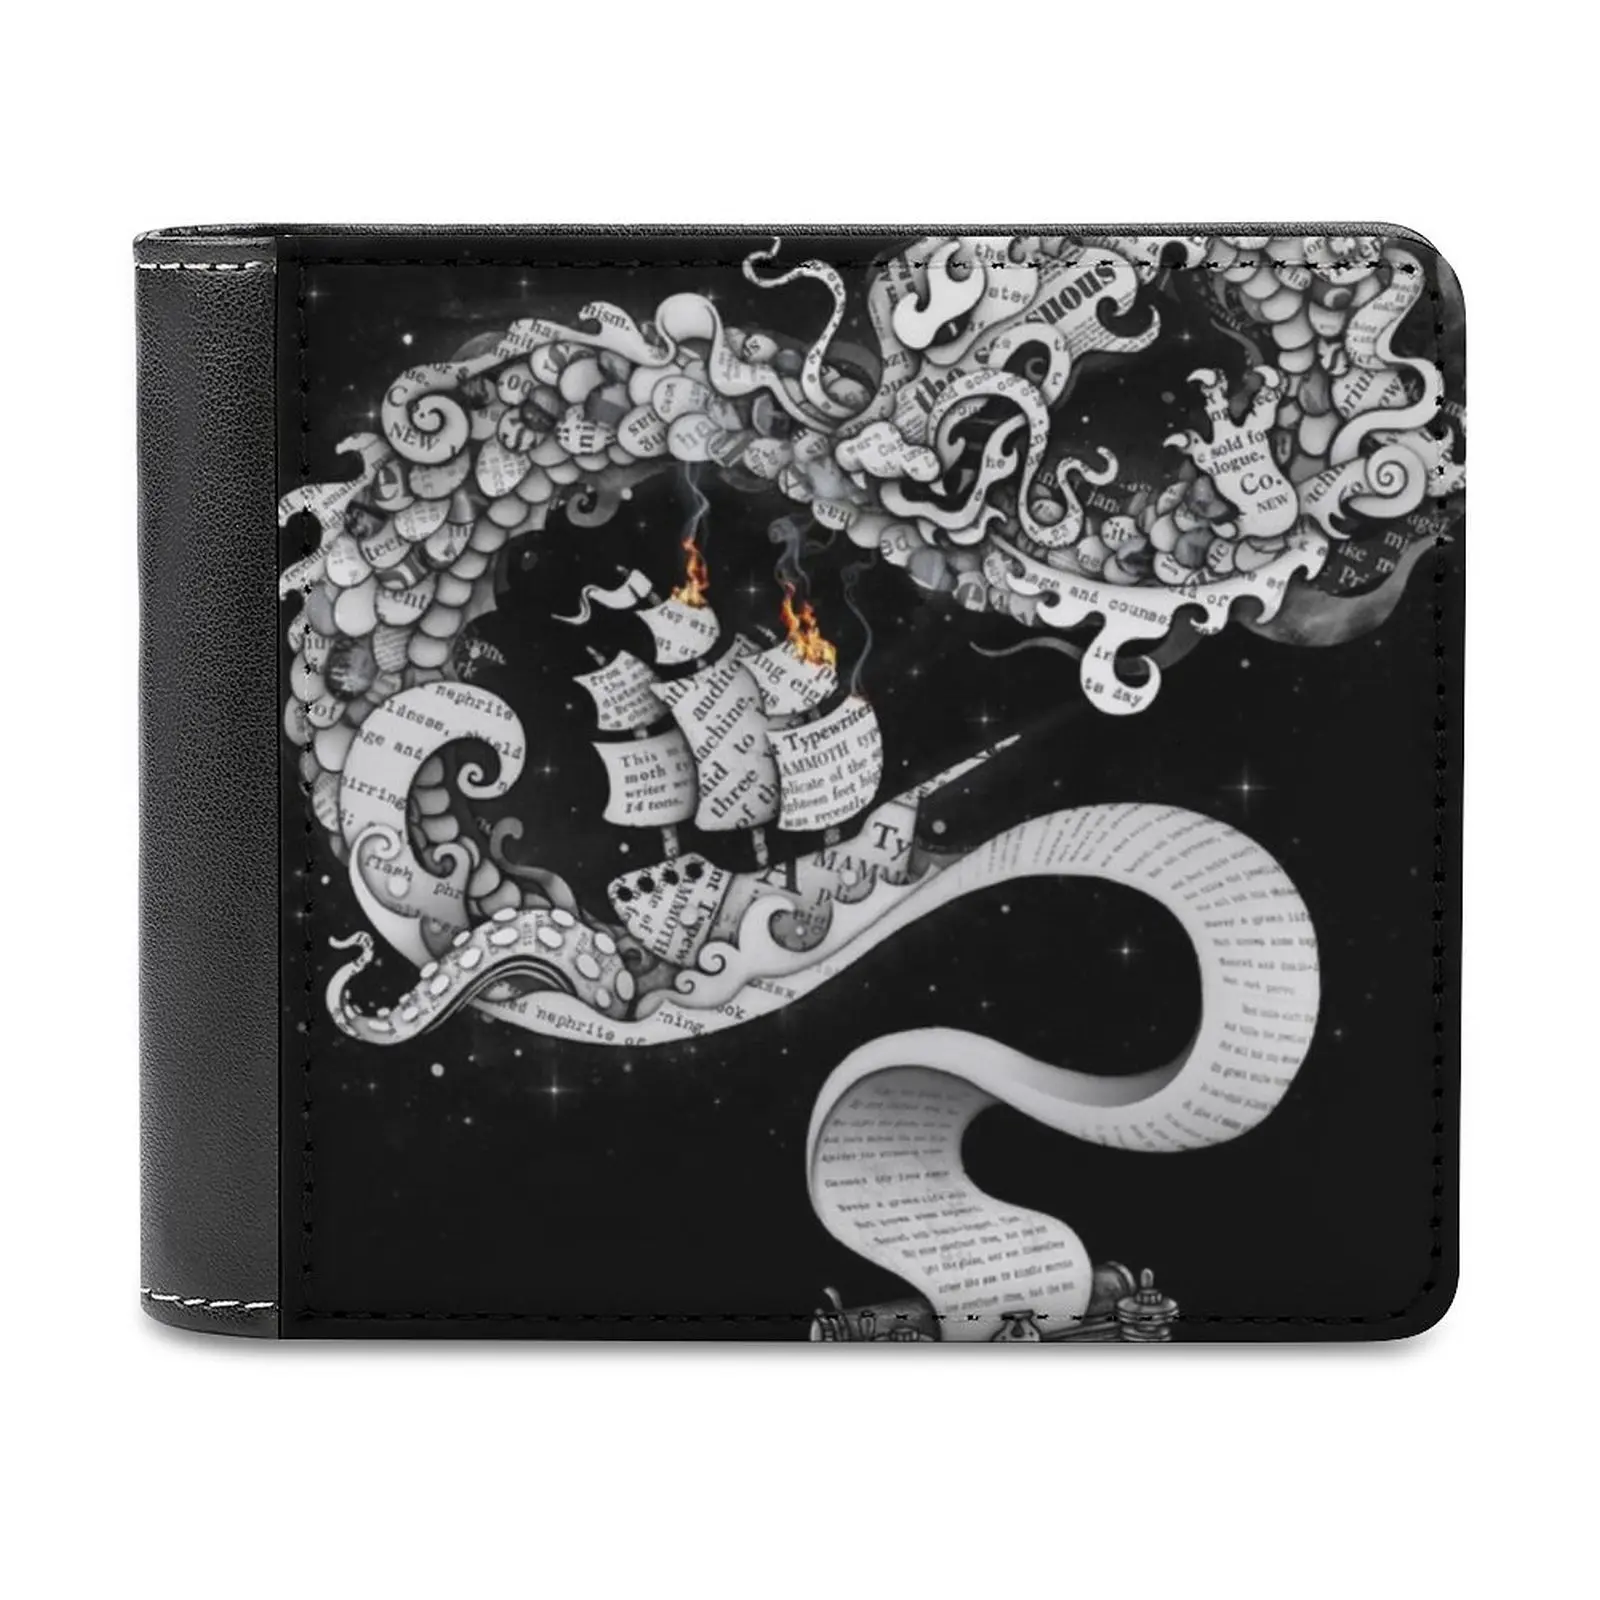 

Unleashed Imagination New Men Wallets Pu Leather Men Purse High Quality Male Wallet Dragon Ship Fire Surreal Collage Waves